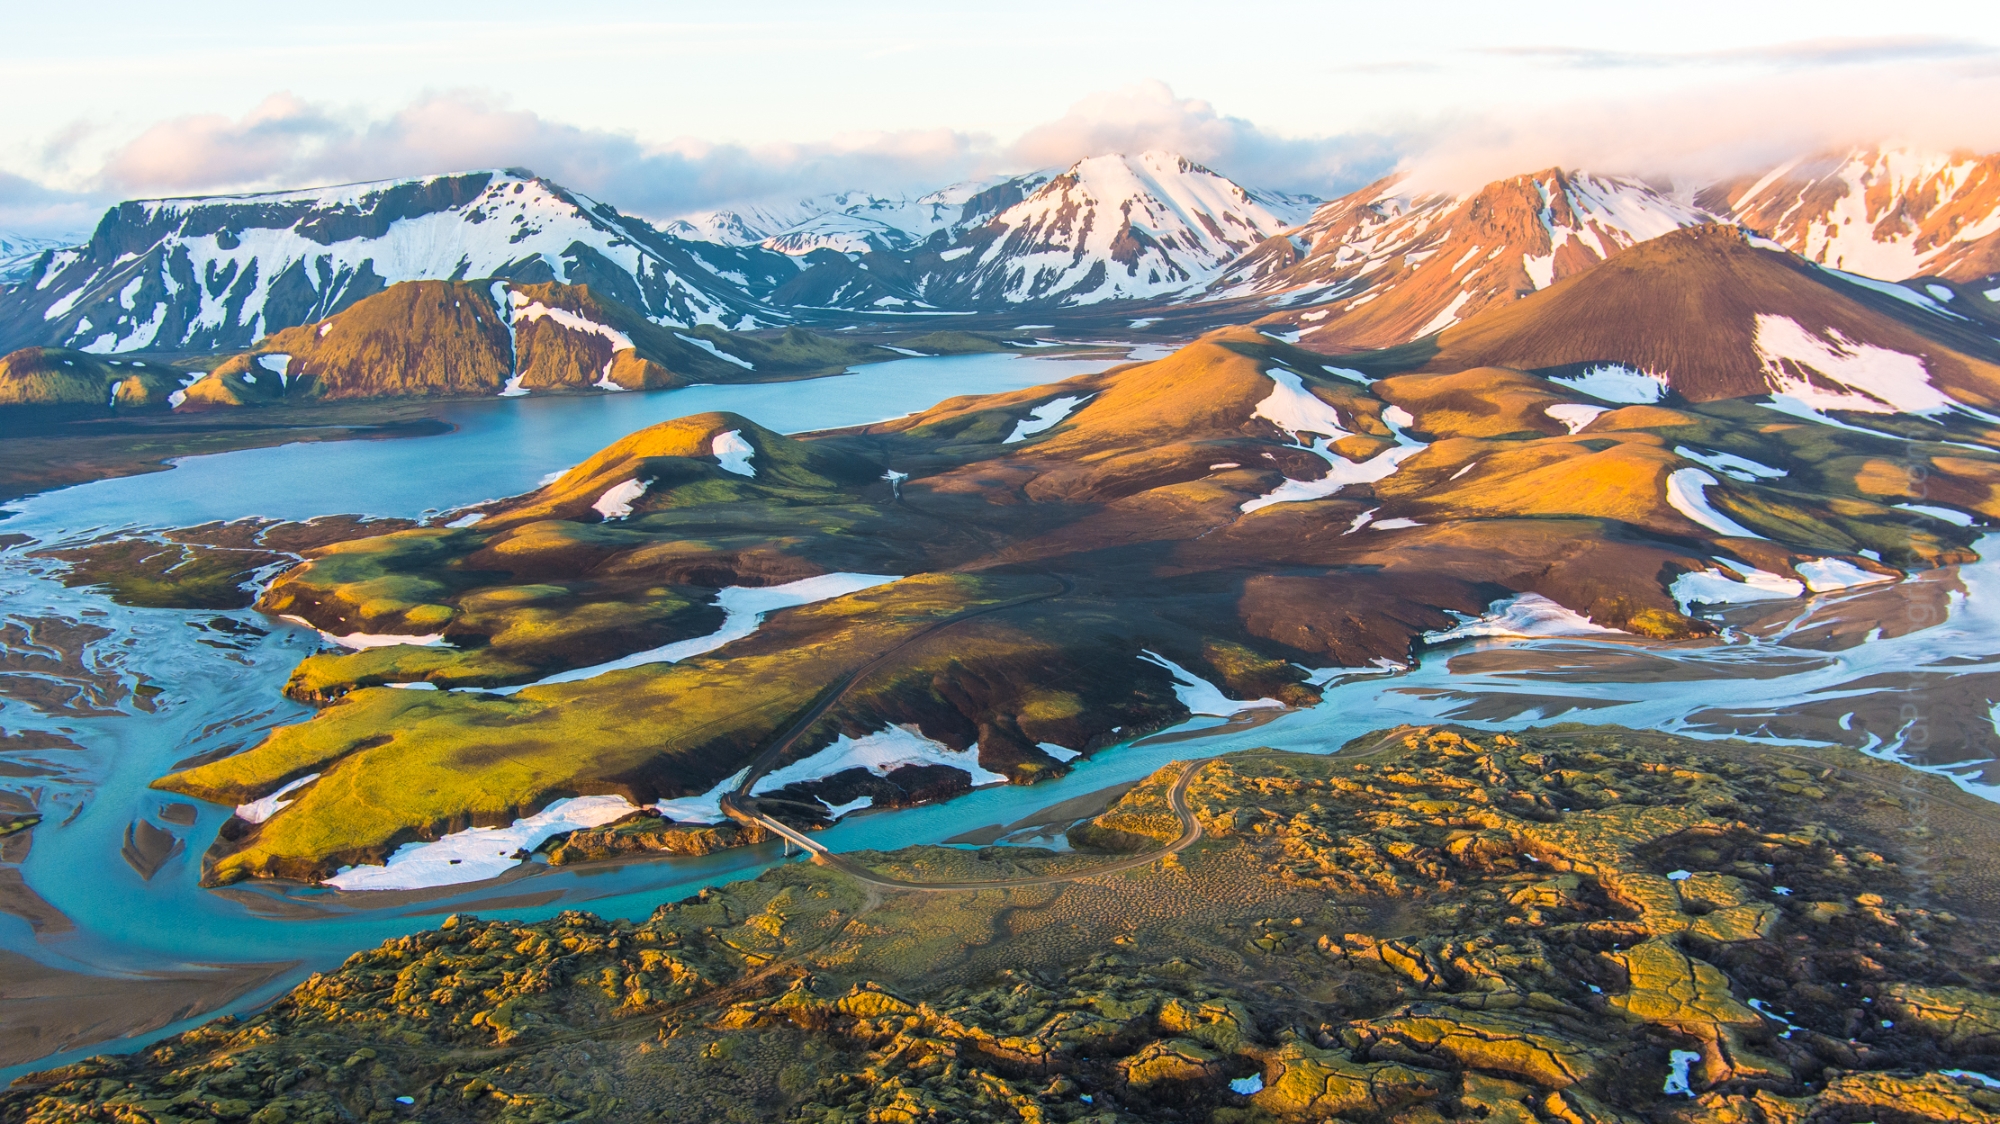 Over Iceland Drone HIghlands Landmannalaugar Colors.jpg Honestly this trip changed my life....crazy as that sounds. I did the Everest base camp trek in Feb and Banff in June and they paled in comparison. The thing about Iceland is sometimes we shooters go on trips and feel pressure to get great shots. But Iceland is so awesome that the amazing shots just keep throwing themselves at you. Its just relentless. At some point I just relaxed and took it all in. 7 trips later, I can't wait to go back this year. Please contact me for your own Iceland Photography tour. #iceland